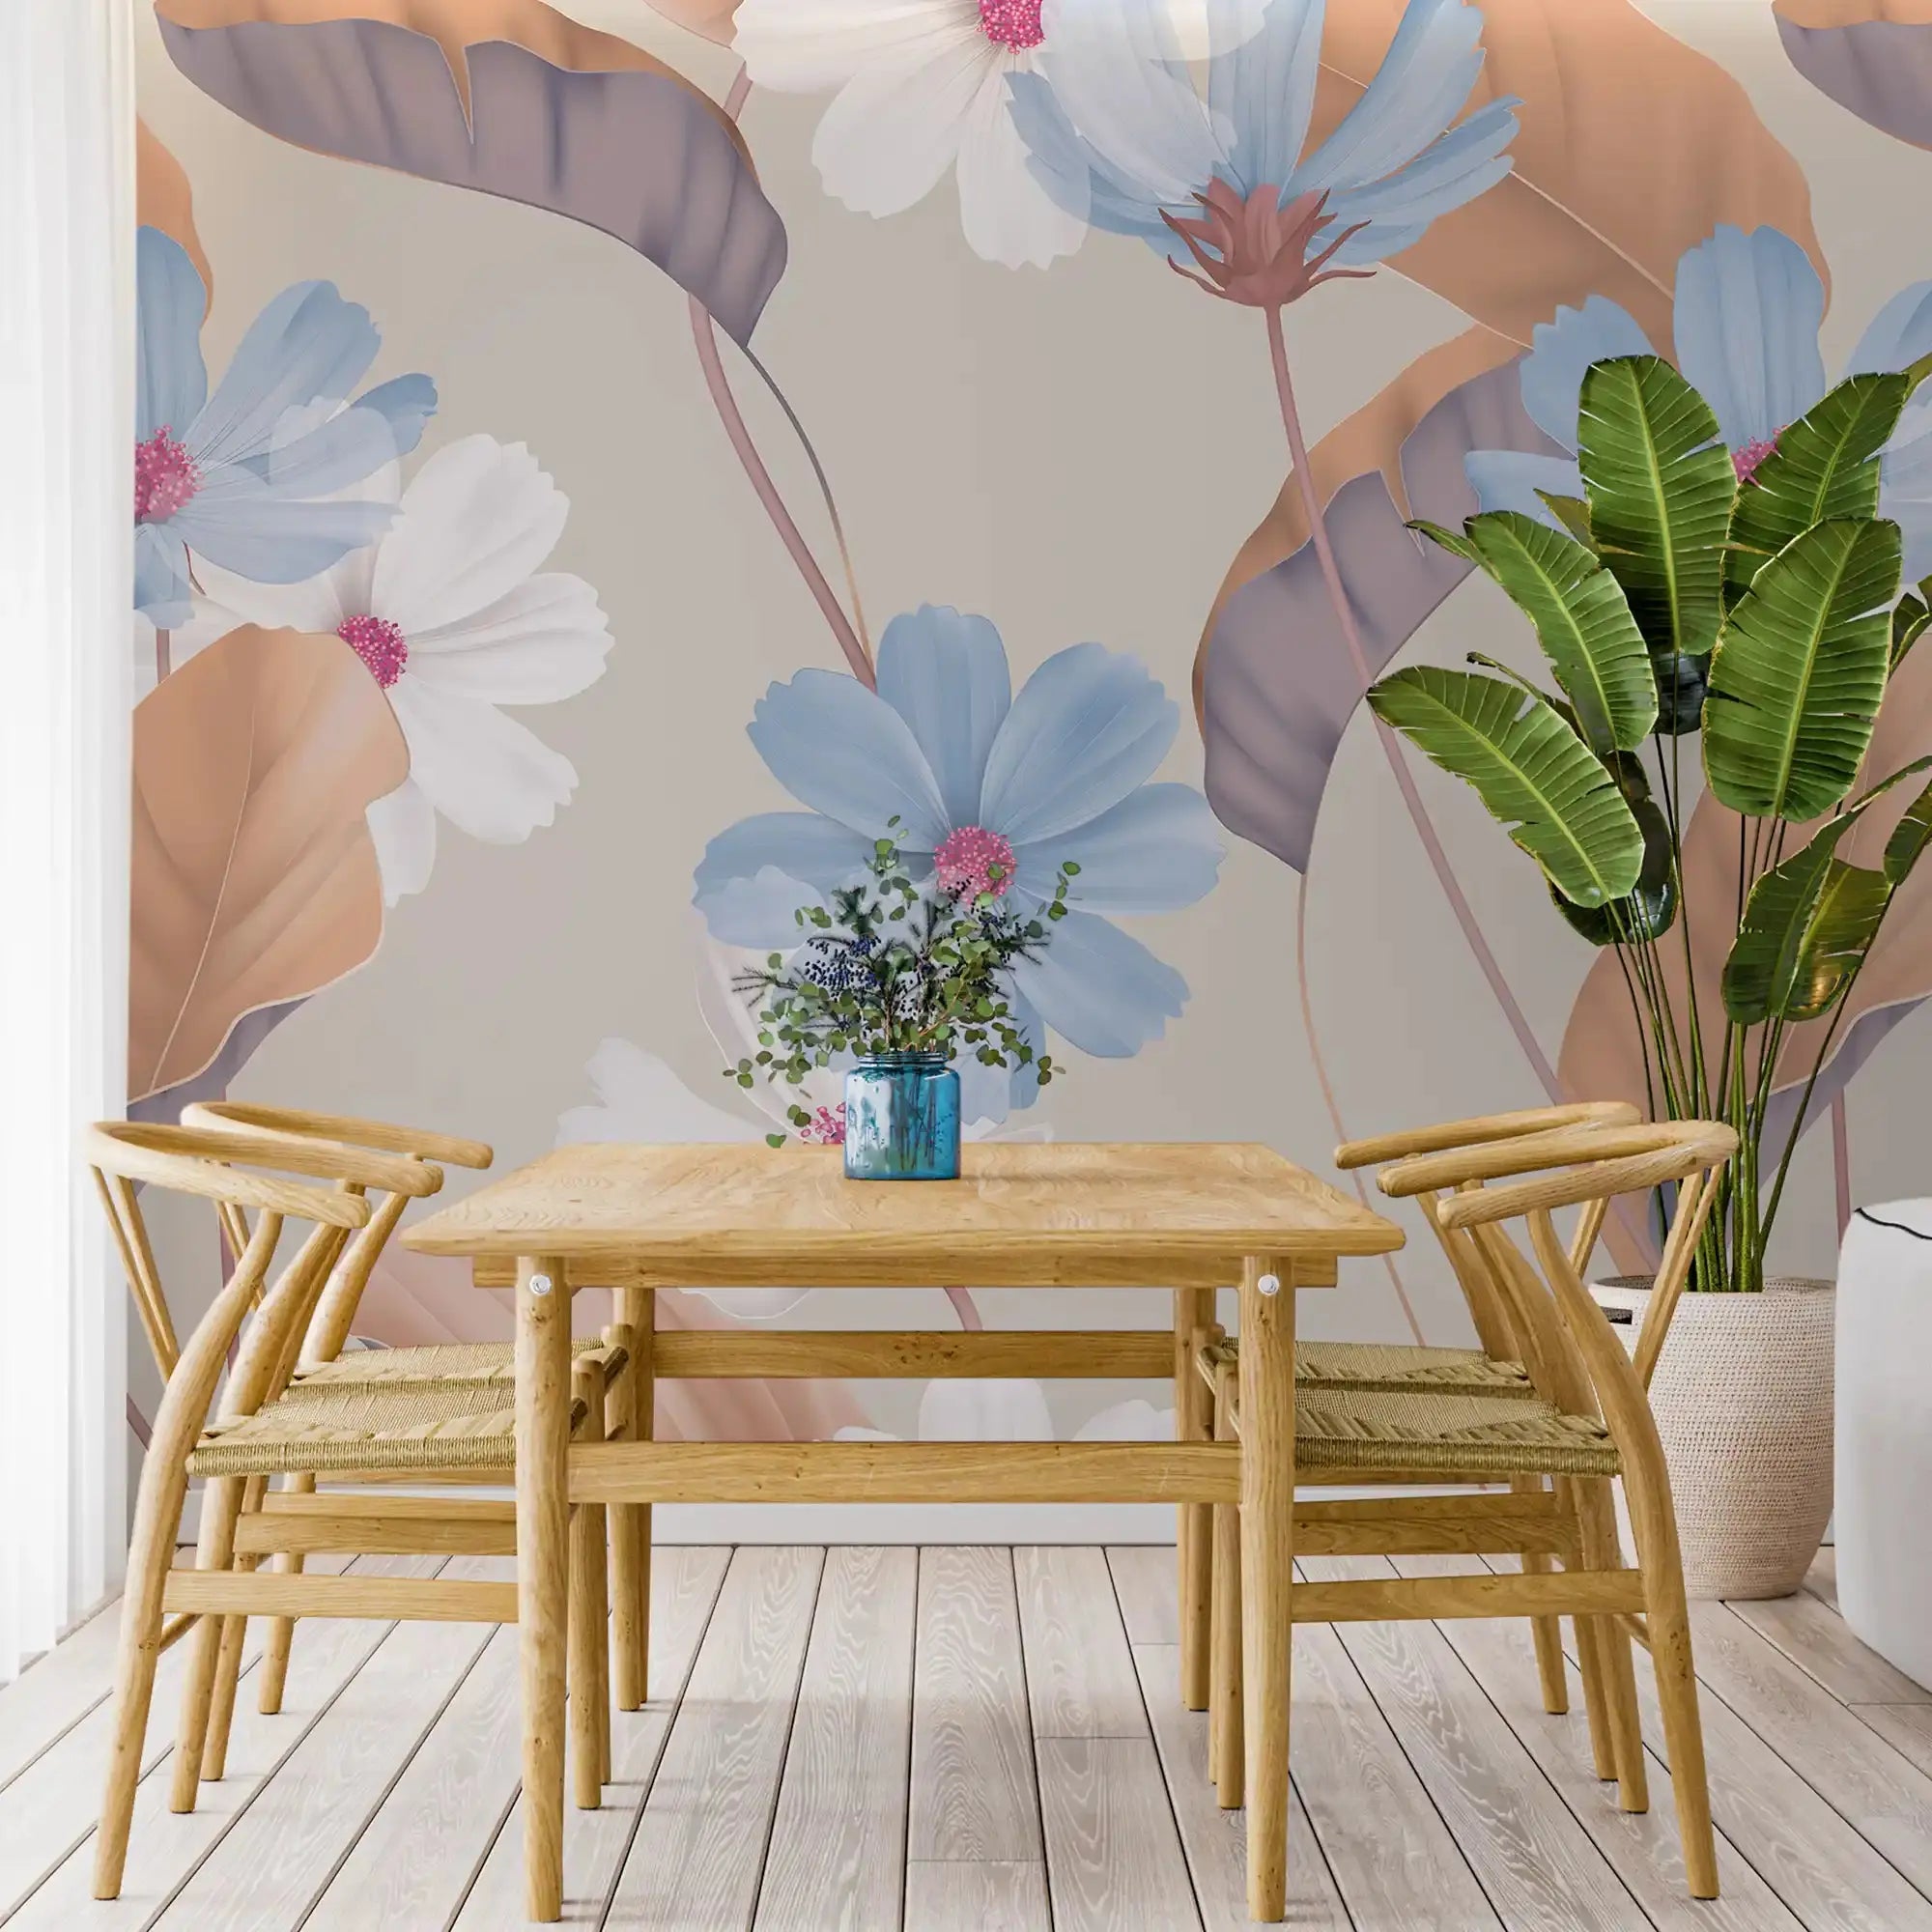 3080-A / Vibrant Boho Floral Wallpaper: Peel and Stick for Easy Application - Self Adhesive, Temporary Wall Mural for DIY Decor - Artevella